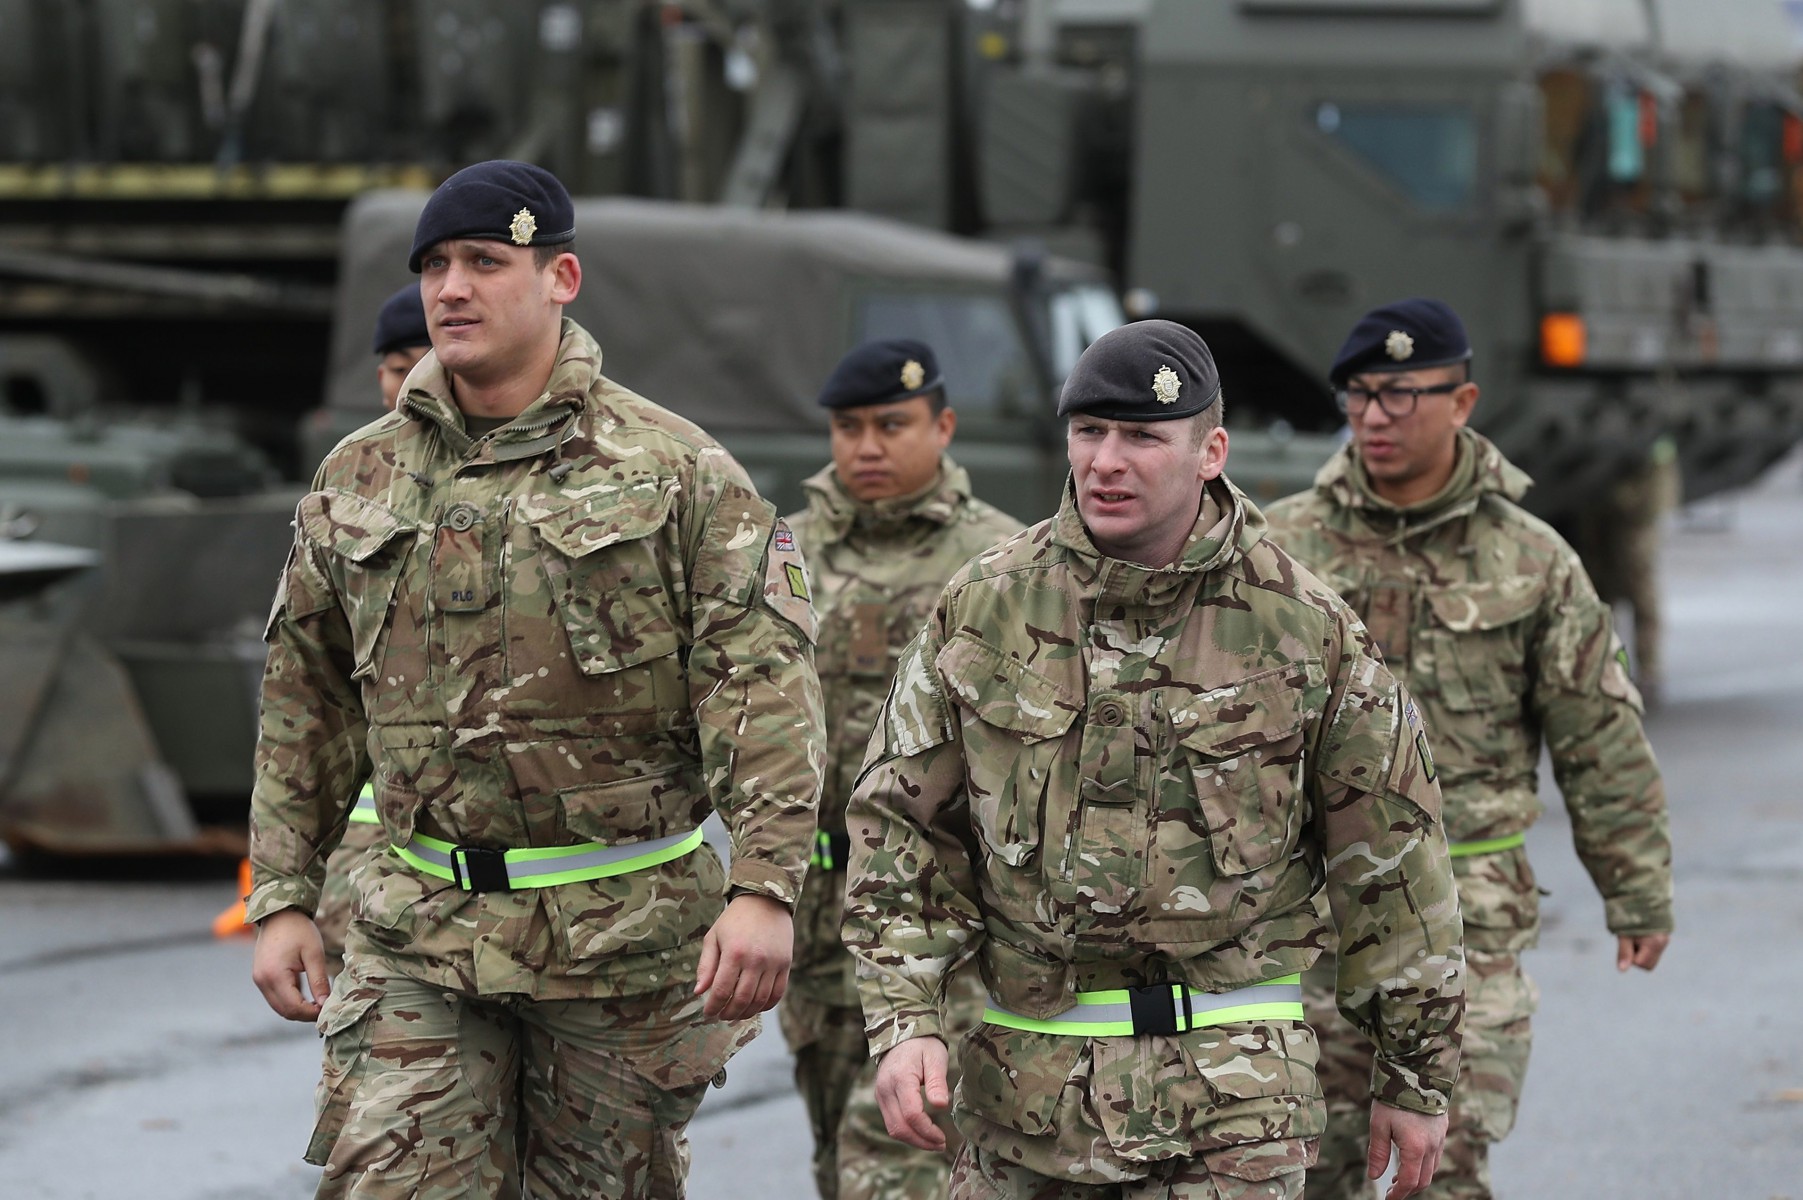 British troops are based in Estonia to guard against Russian threats